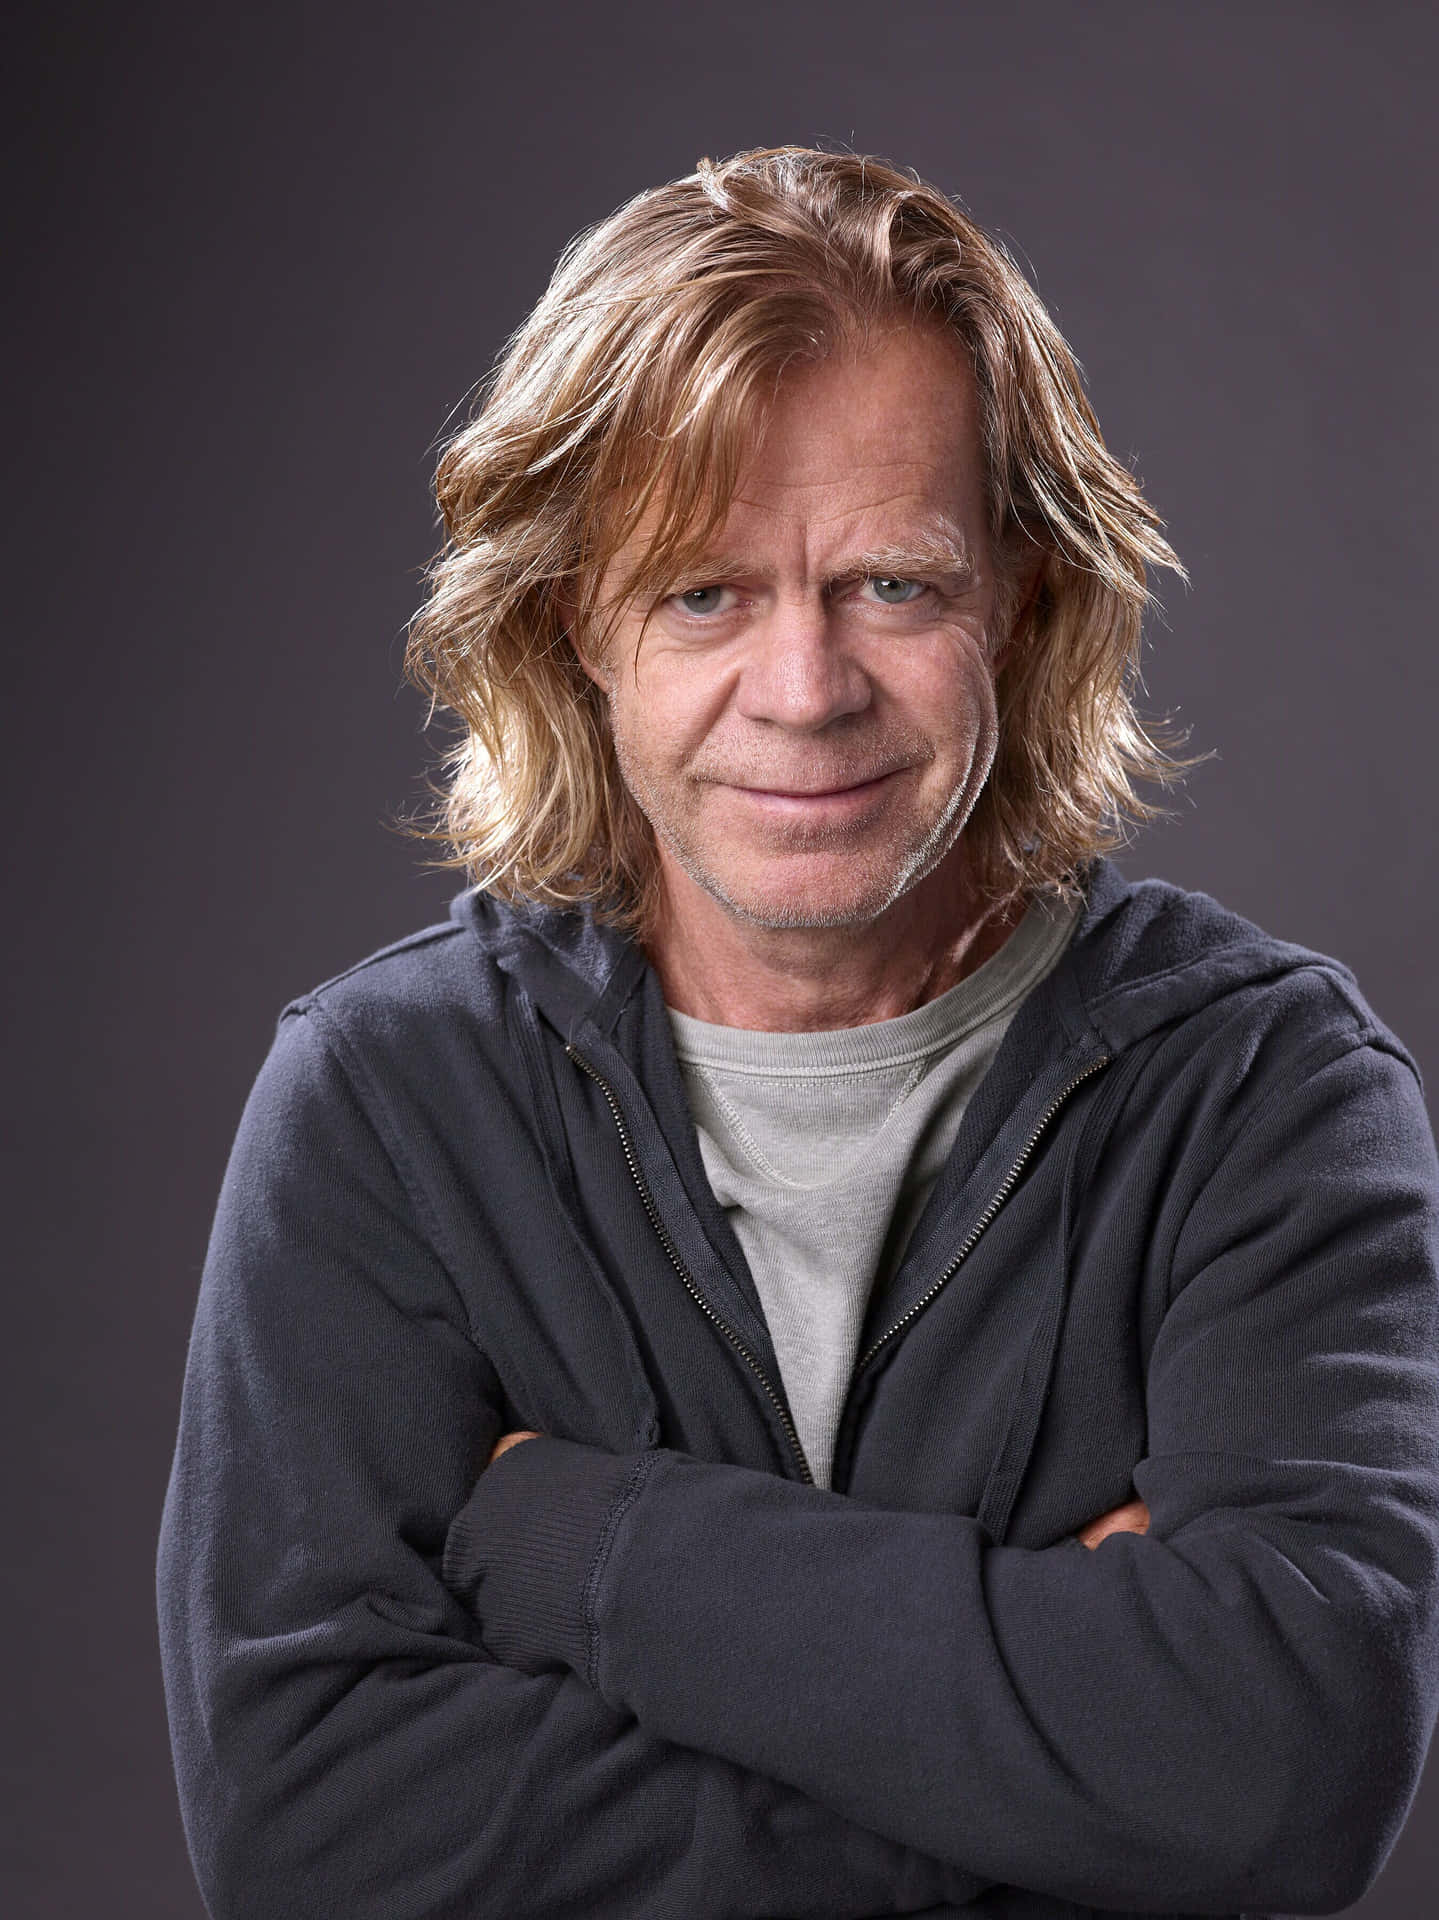 William H. Macy Posing For A Professional Photoshoot Background